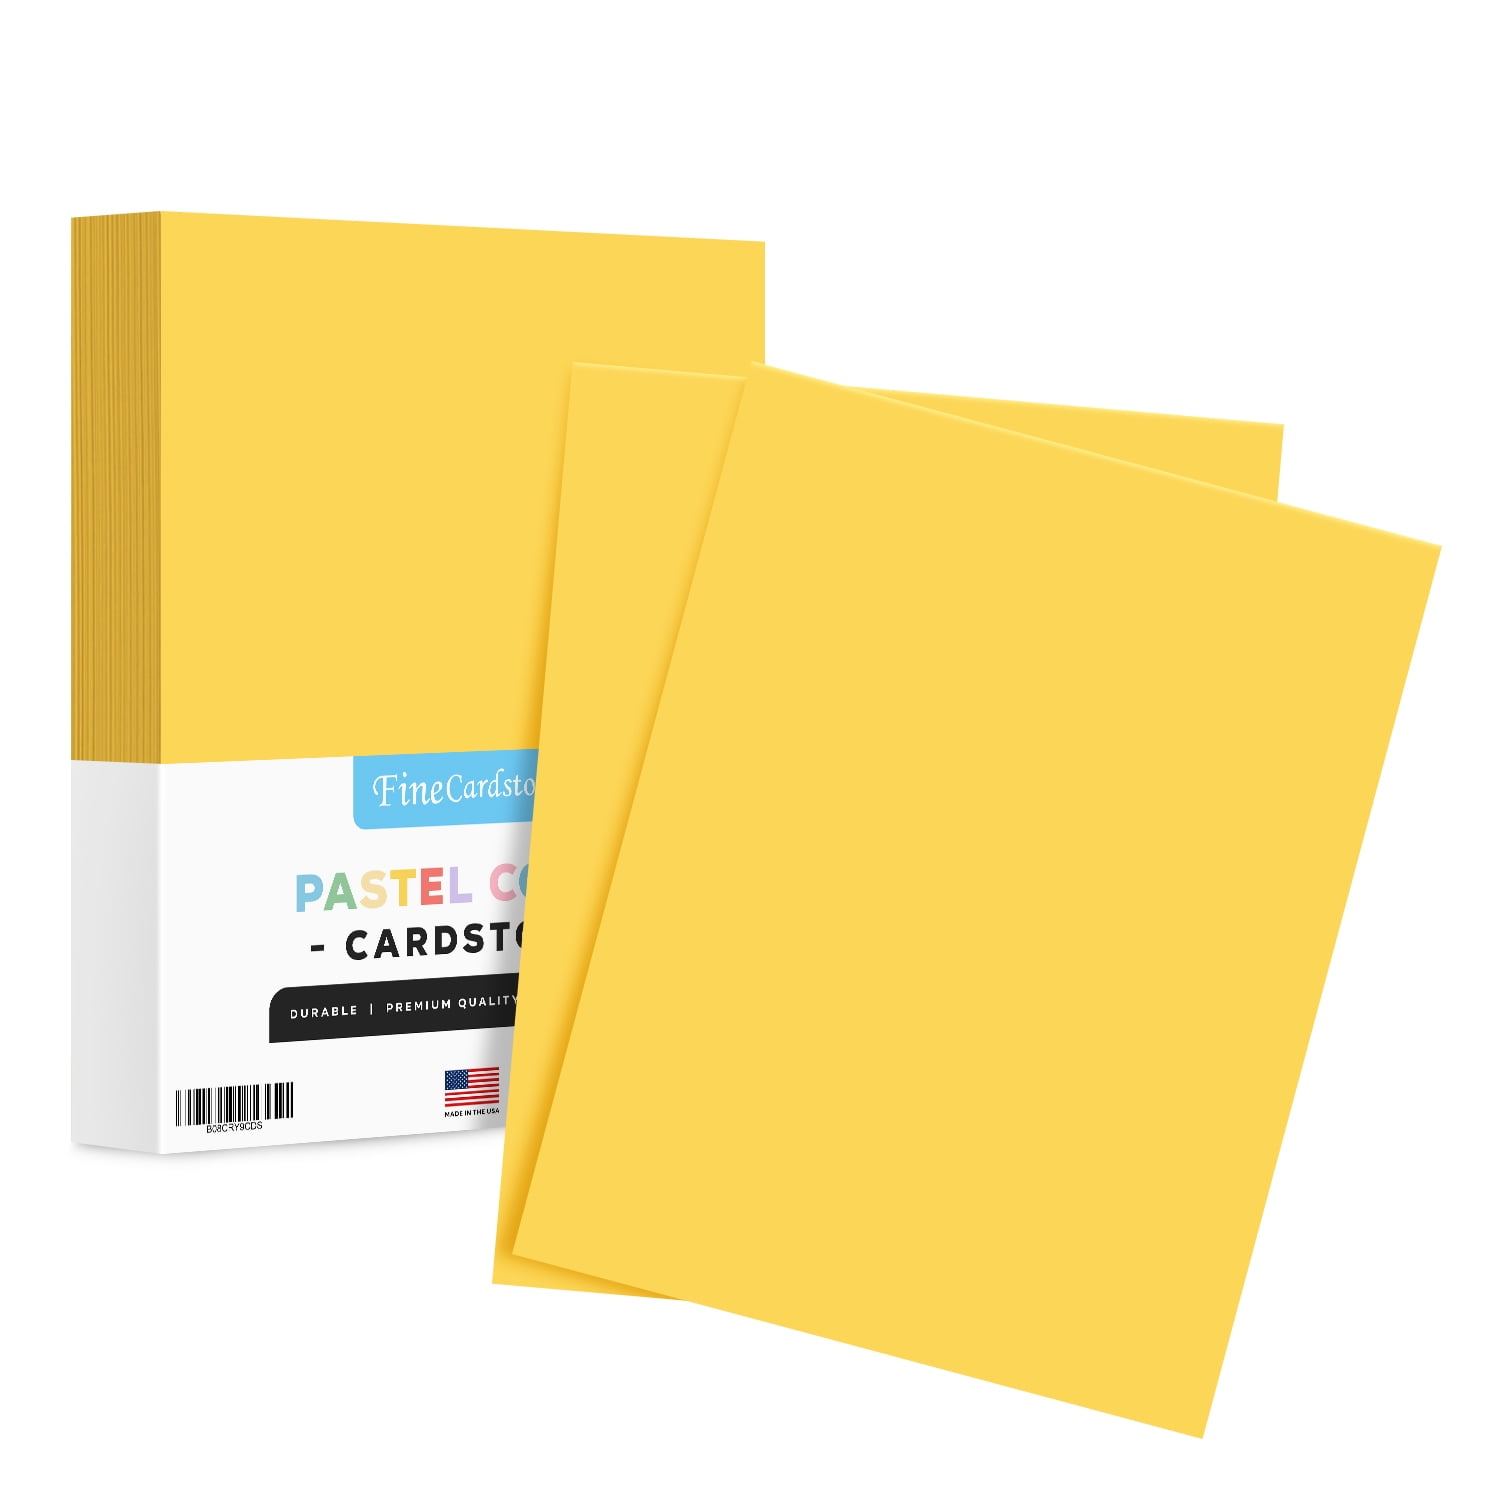 Copy Paper 147gsm Pink, Blue, Green, Cream, Gray Vellum Bristol Cover Printer Paper 8.5 x 11 20 Pieces of 5 Different Colored Paper 100 Assorted Colored Sheet Card Stock Paper 67lb